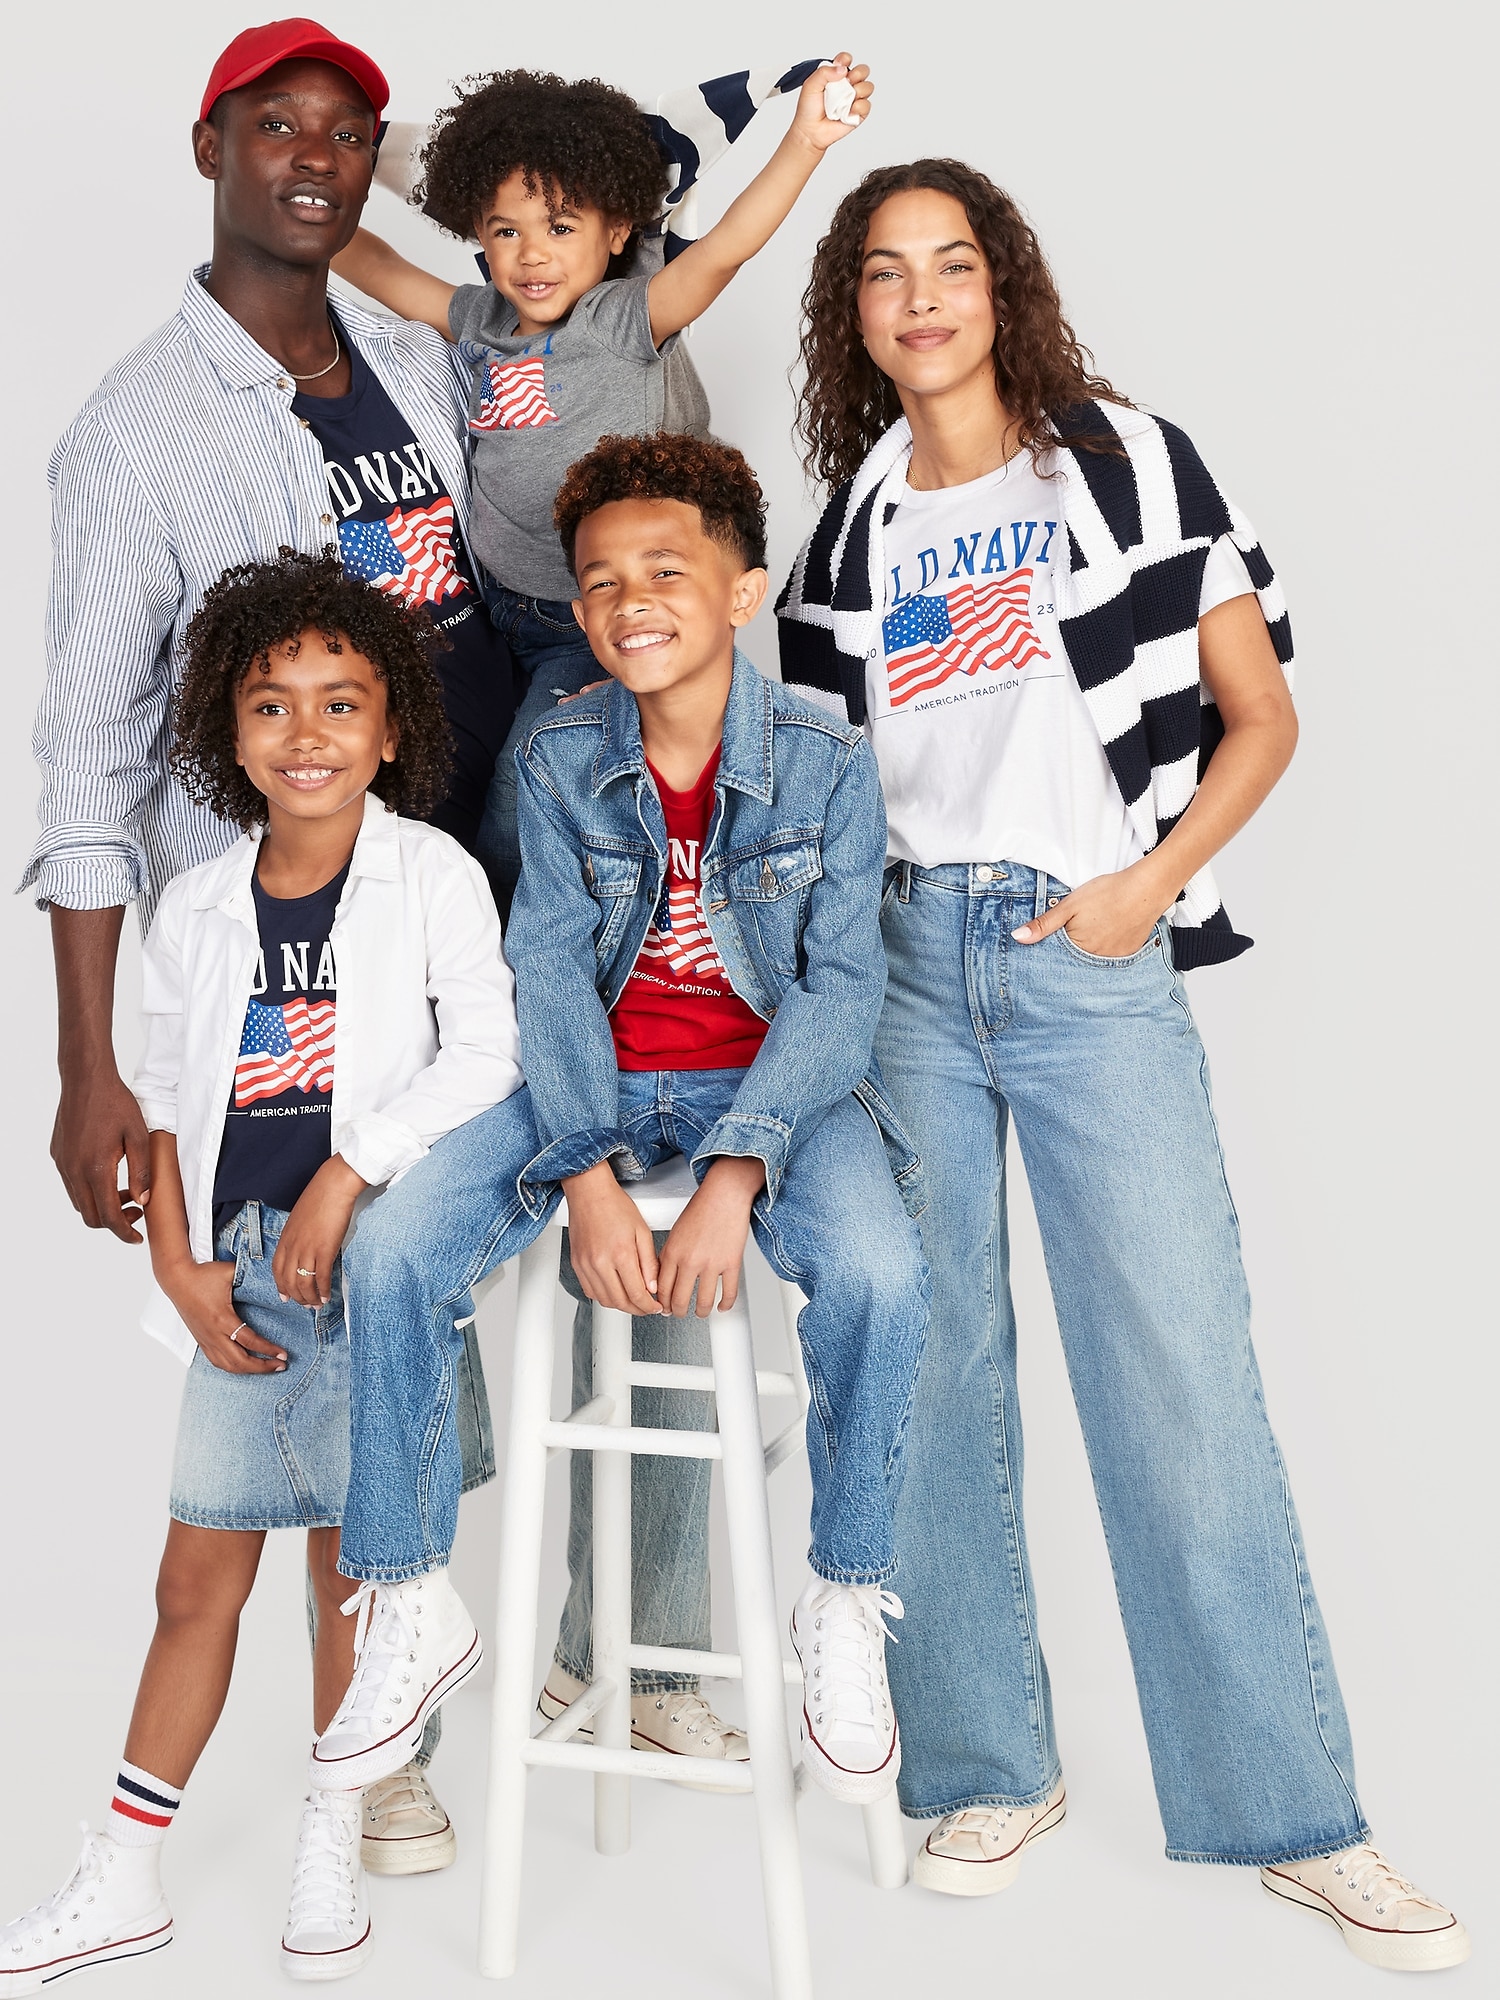 Old Navy Brings Back Classic Flag Shirts in Time for July 4th